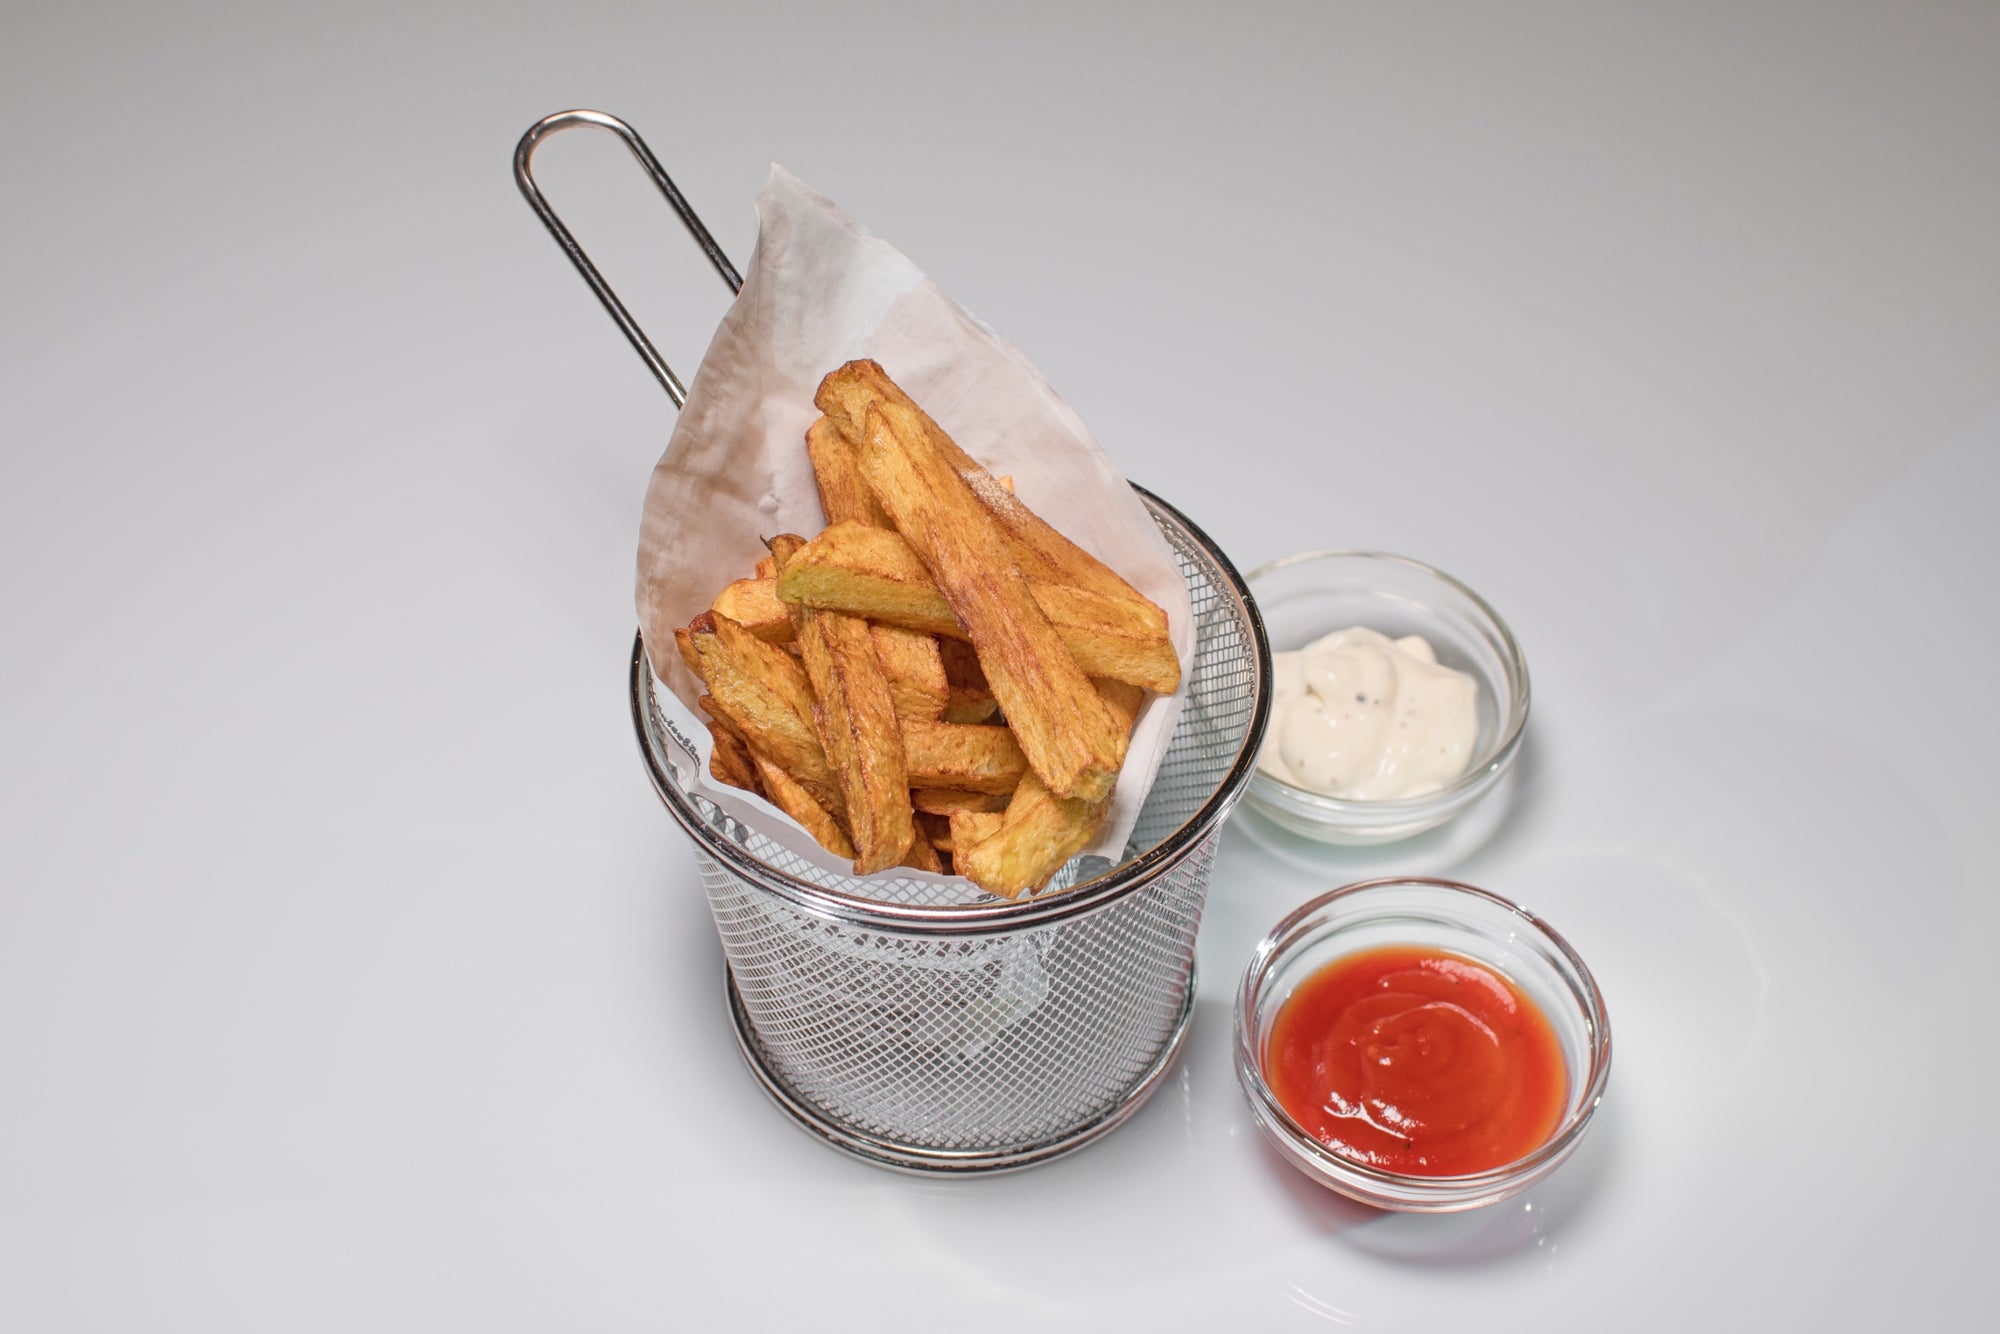 French fries with Truffle Spice